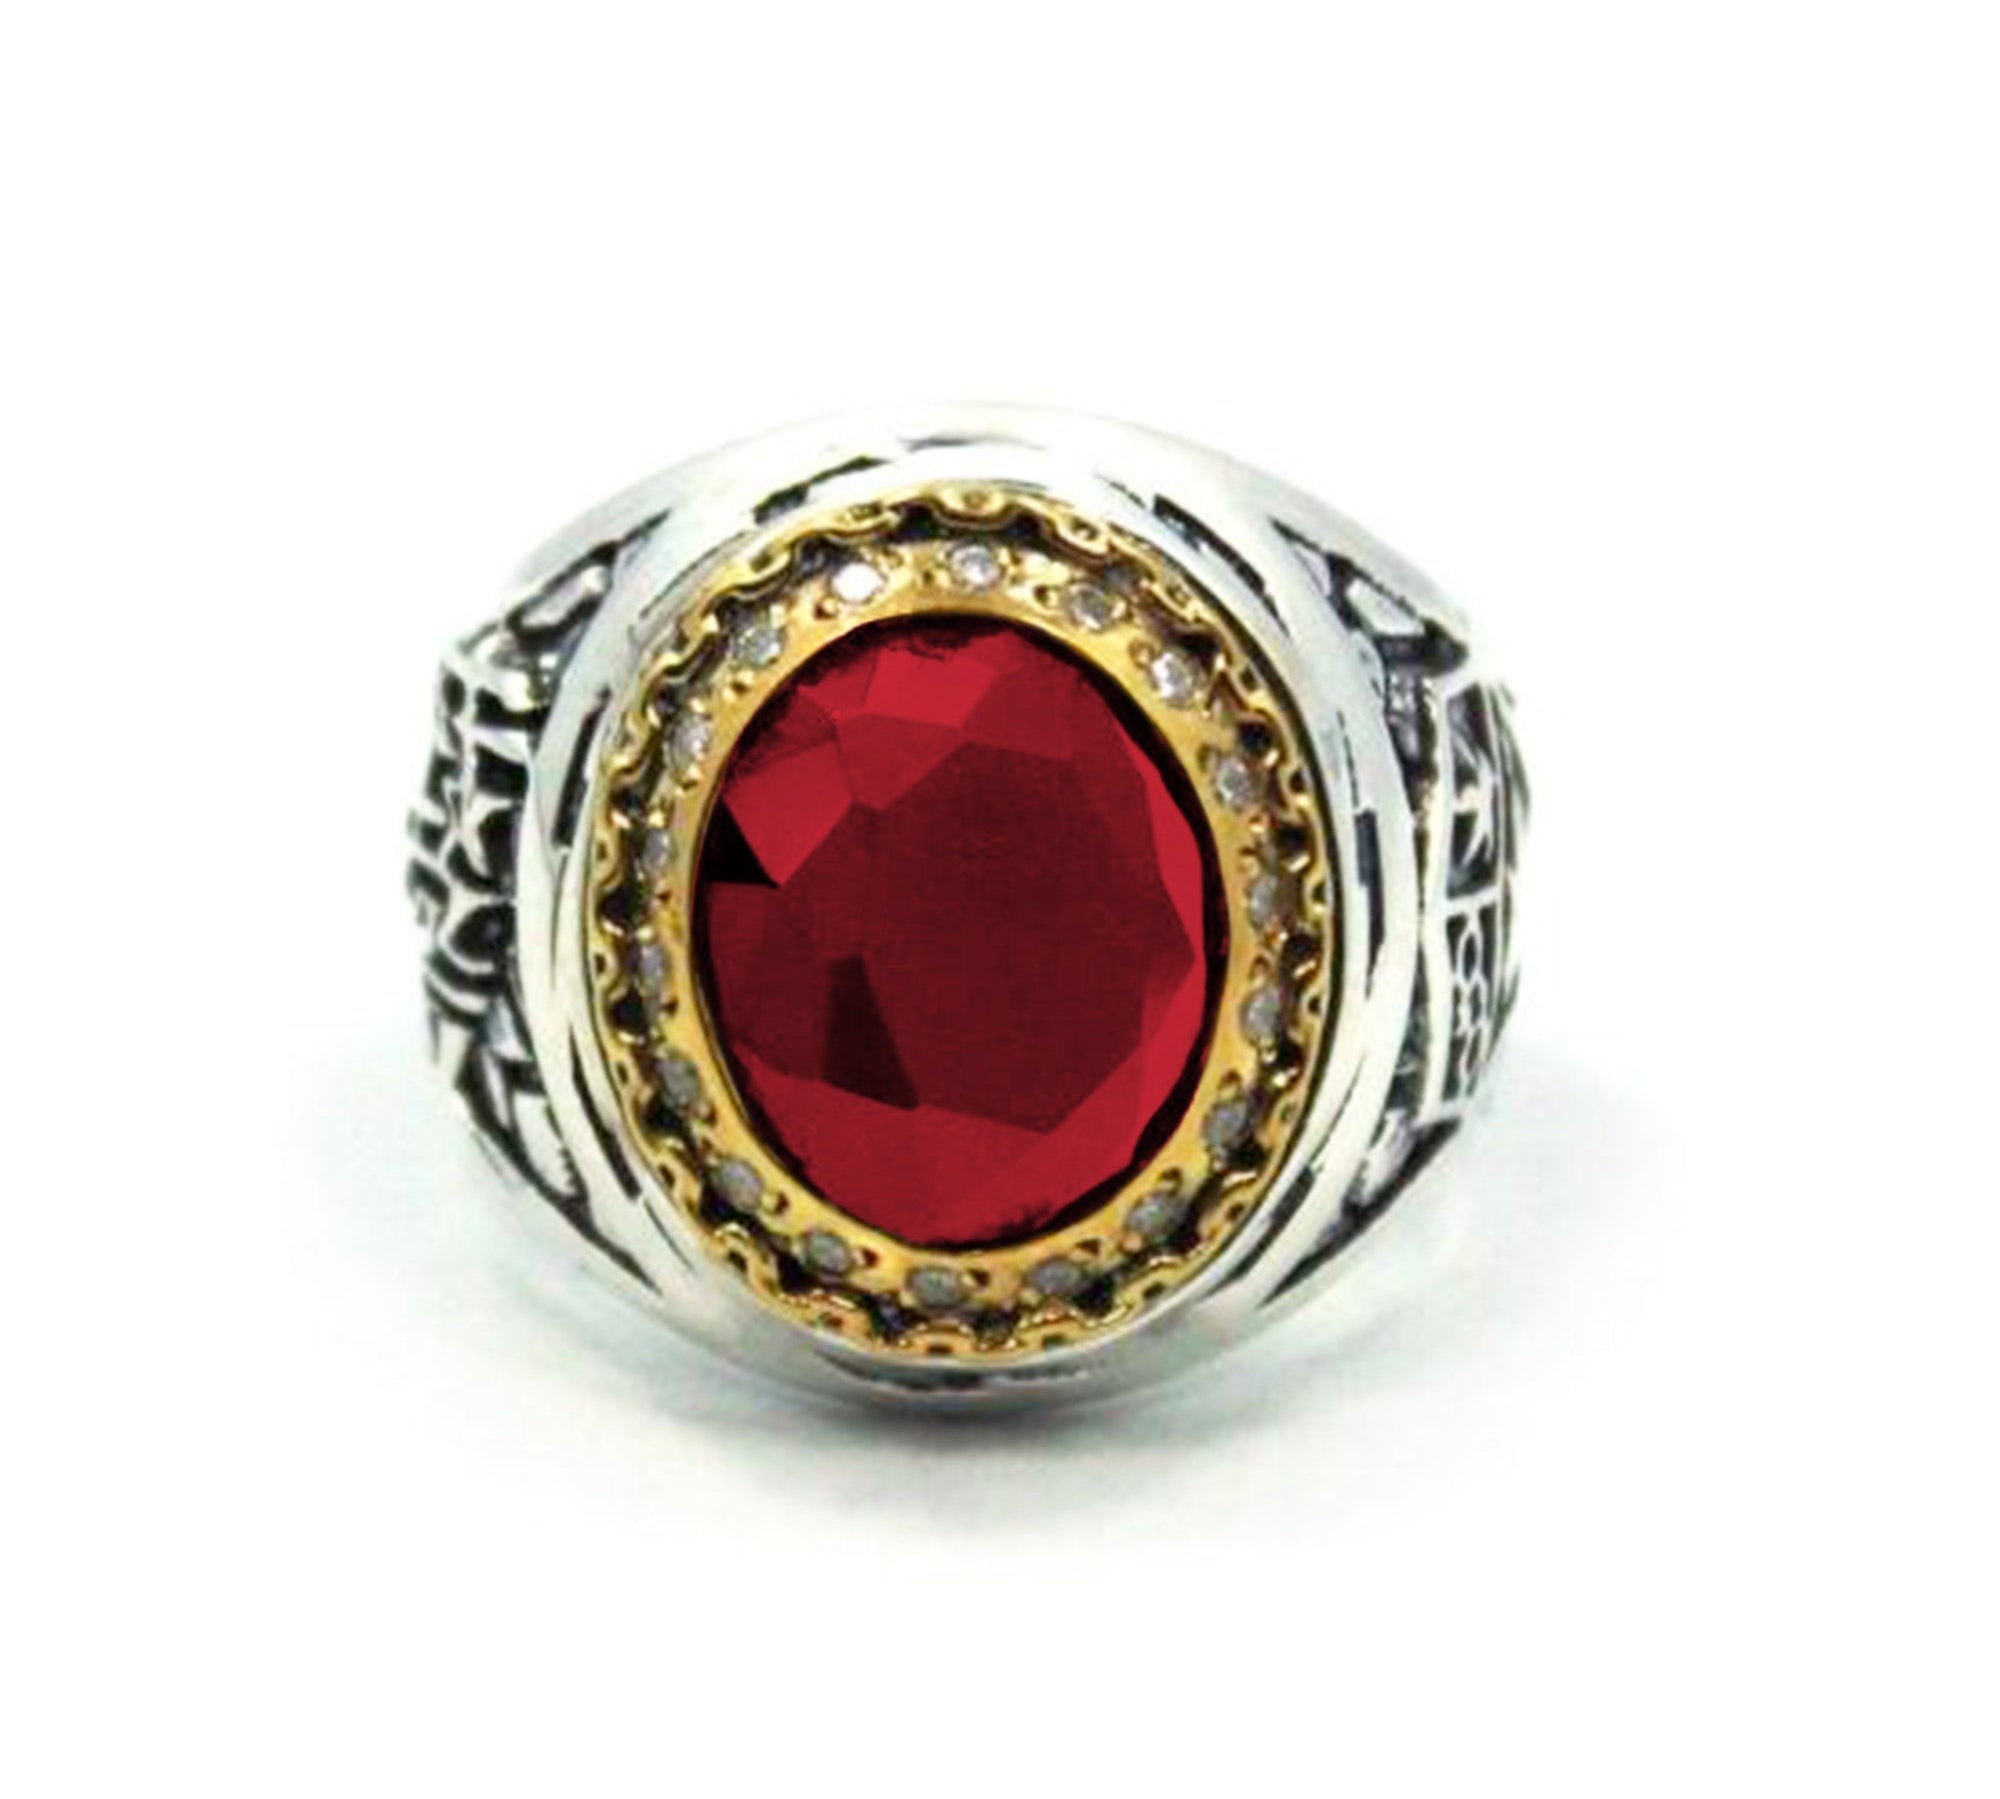 His No Class Ring pm rings Precious Metals 2-Tone 9 Red